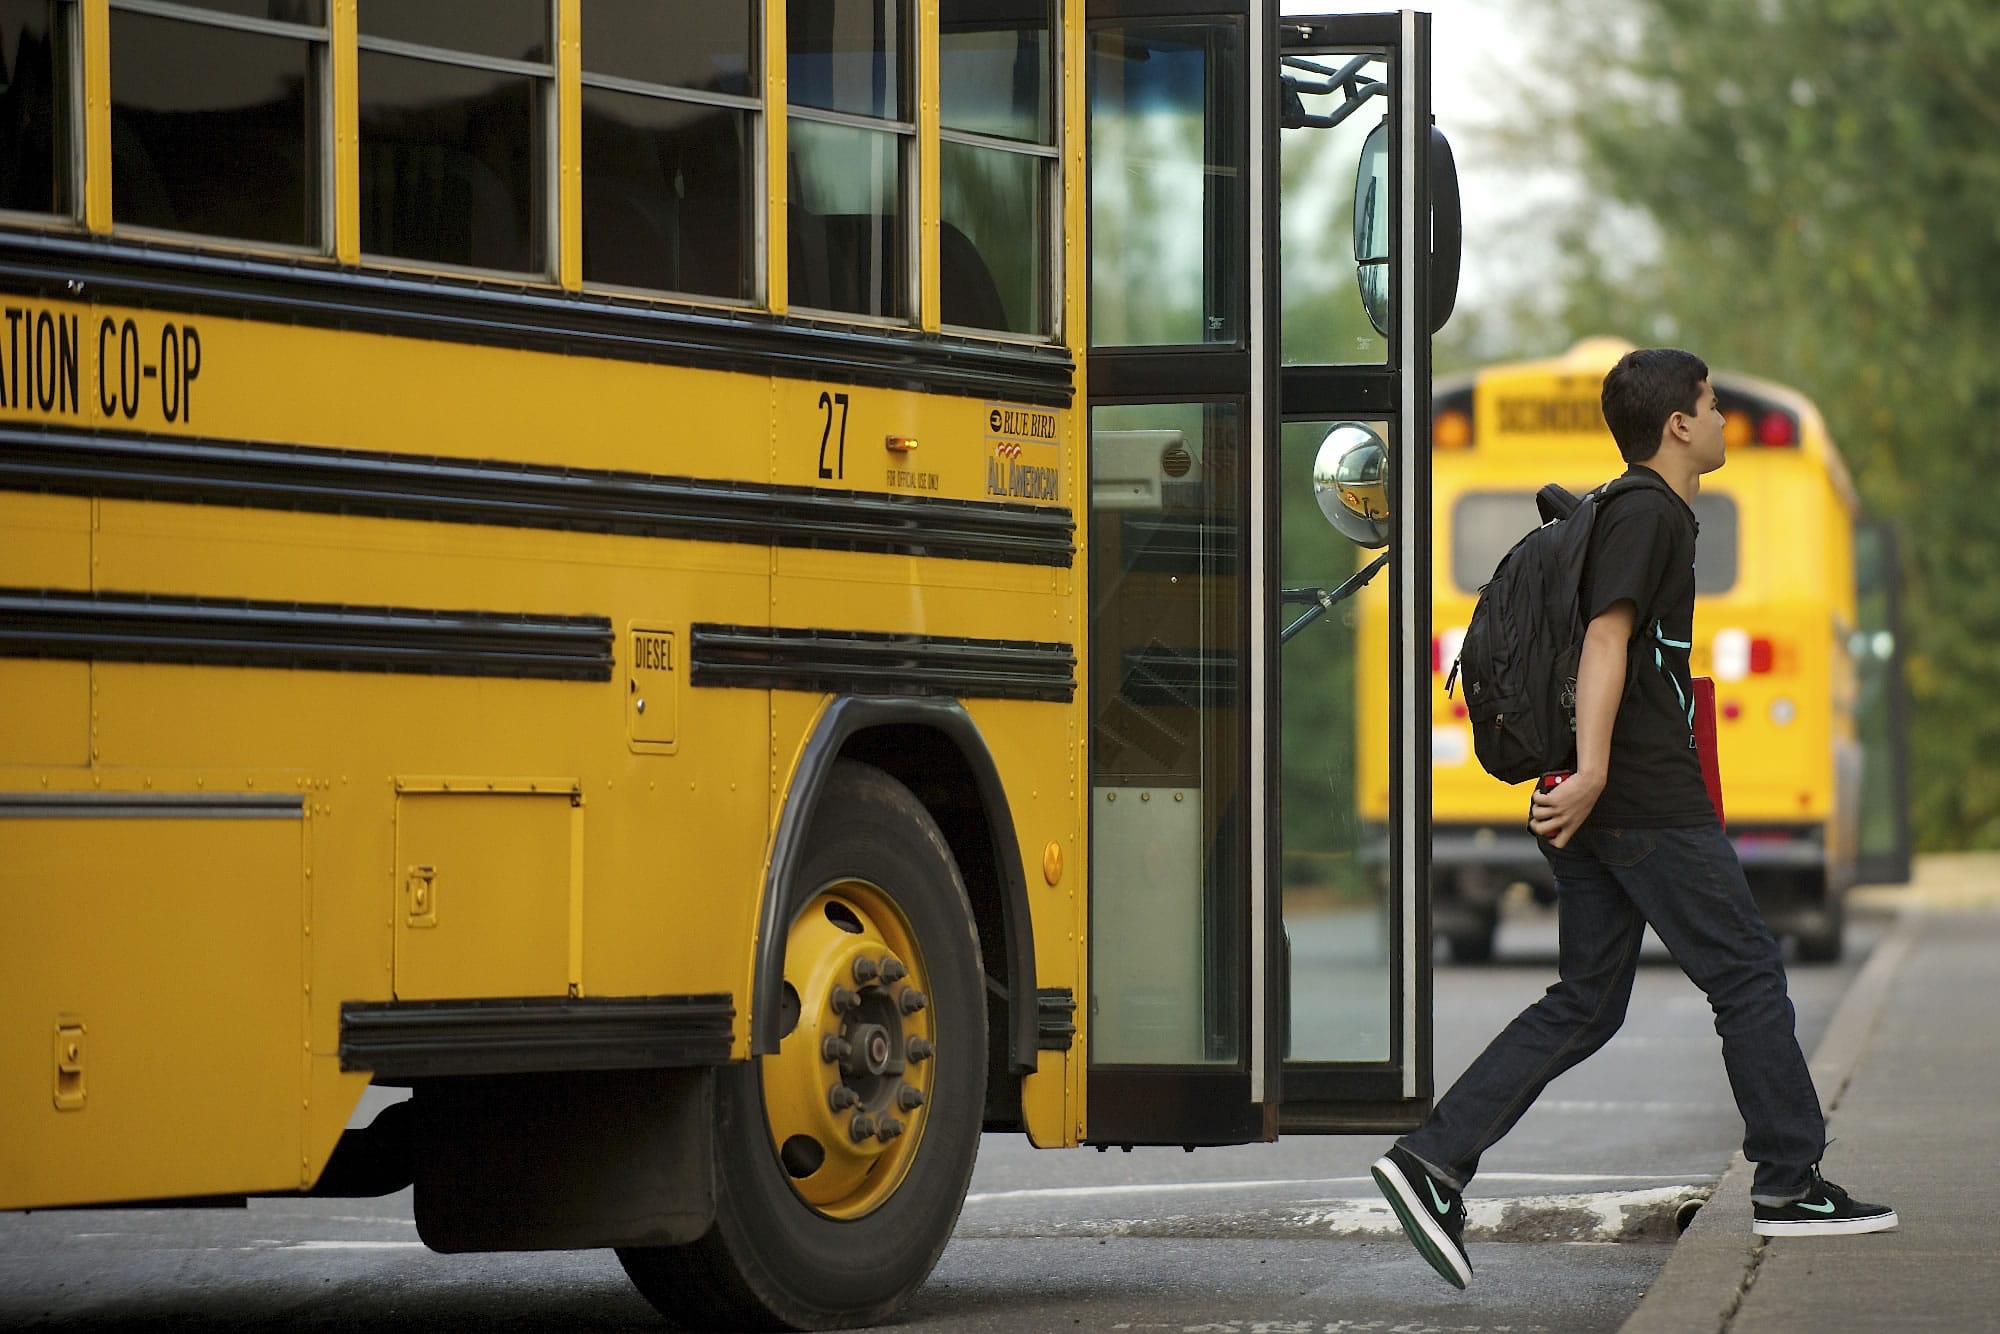 A student at Ridgefield High School disembarks a school bus Wednesday morning, the first day of school.